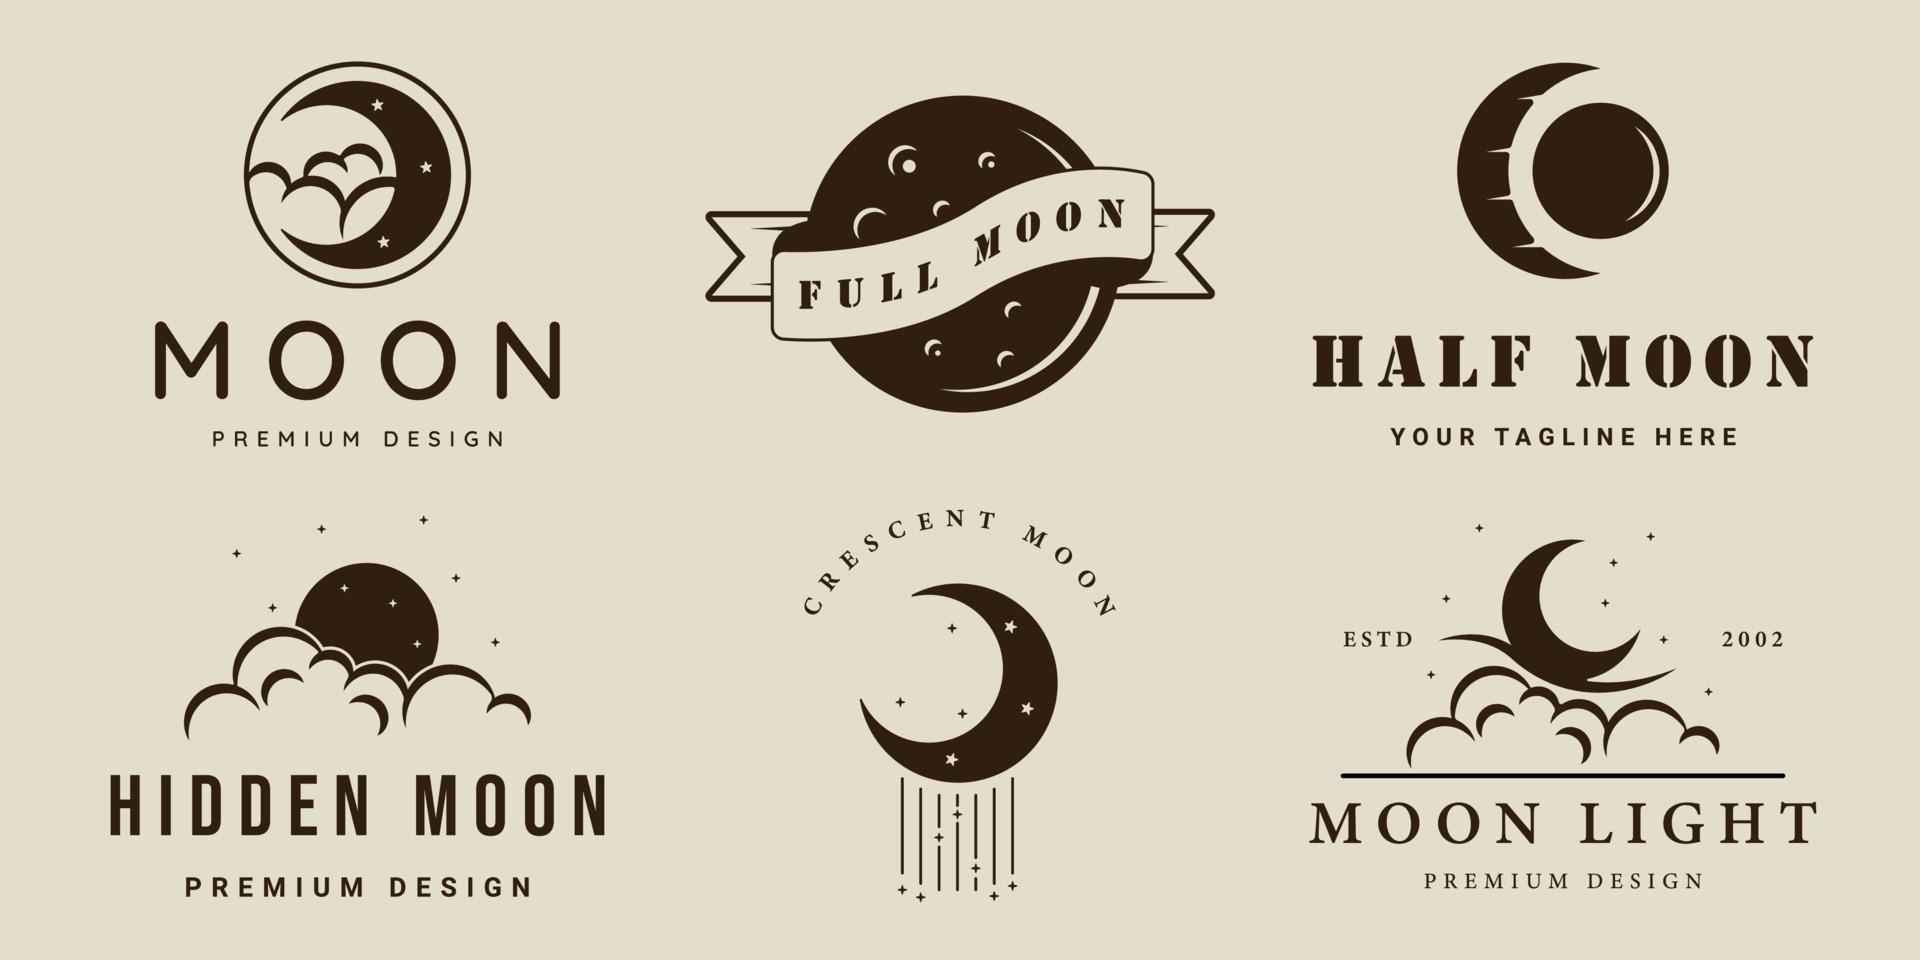 set of moon or lunar logo vintage vector illustration template icon graphic design. bundle collection of various crescent sign or symbol with simple retro style